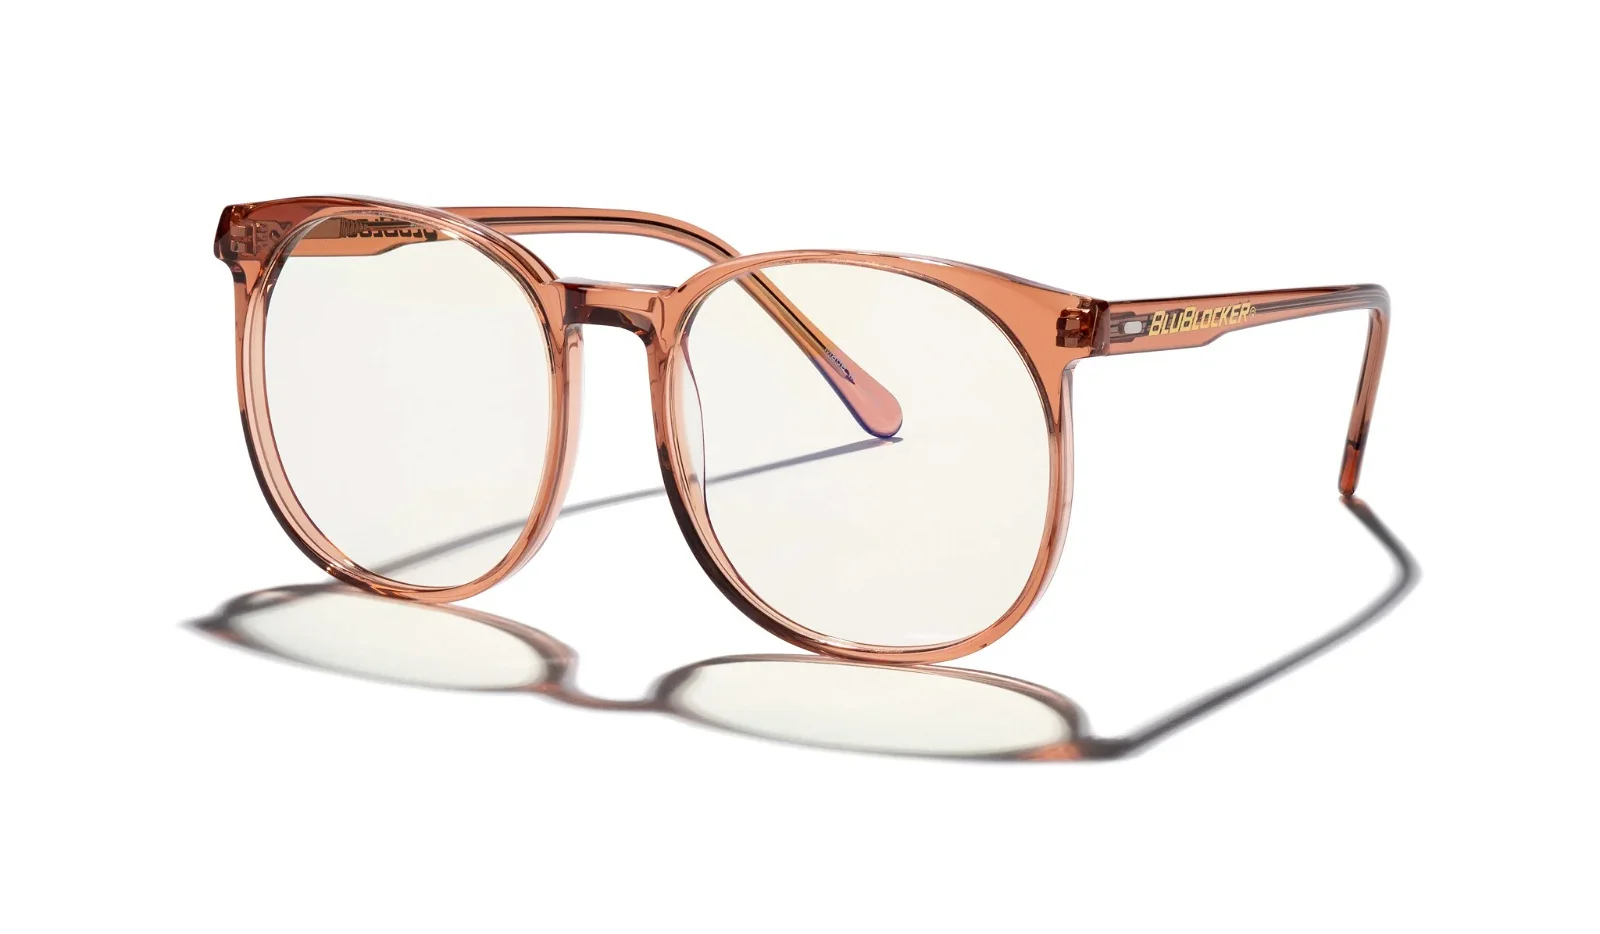 McGill Tech Glasses with Acetate Frame in Rose